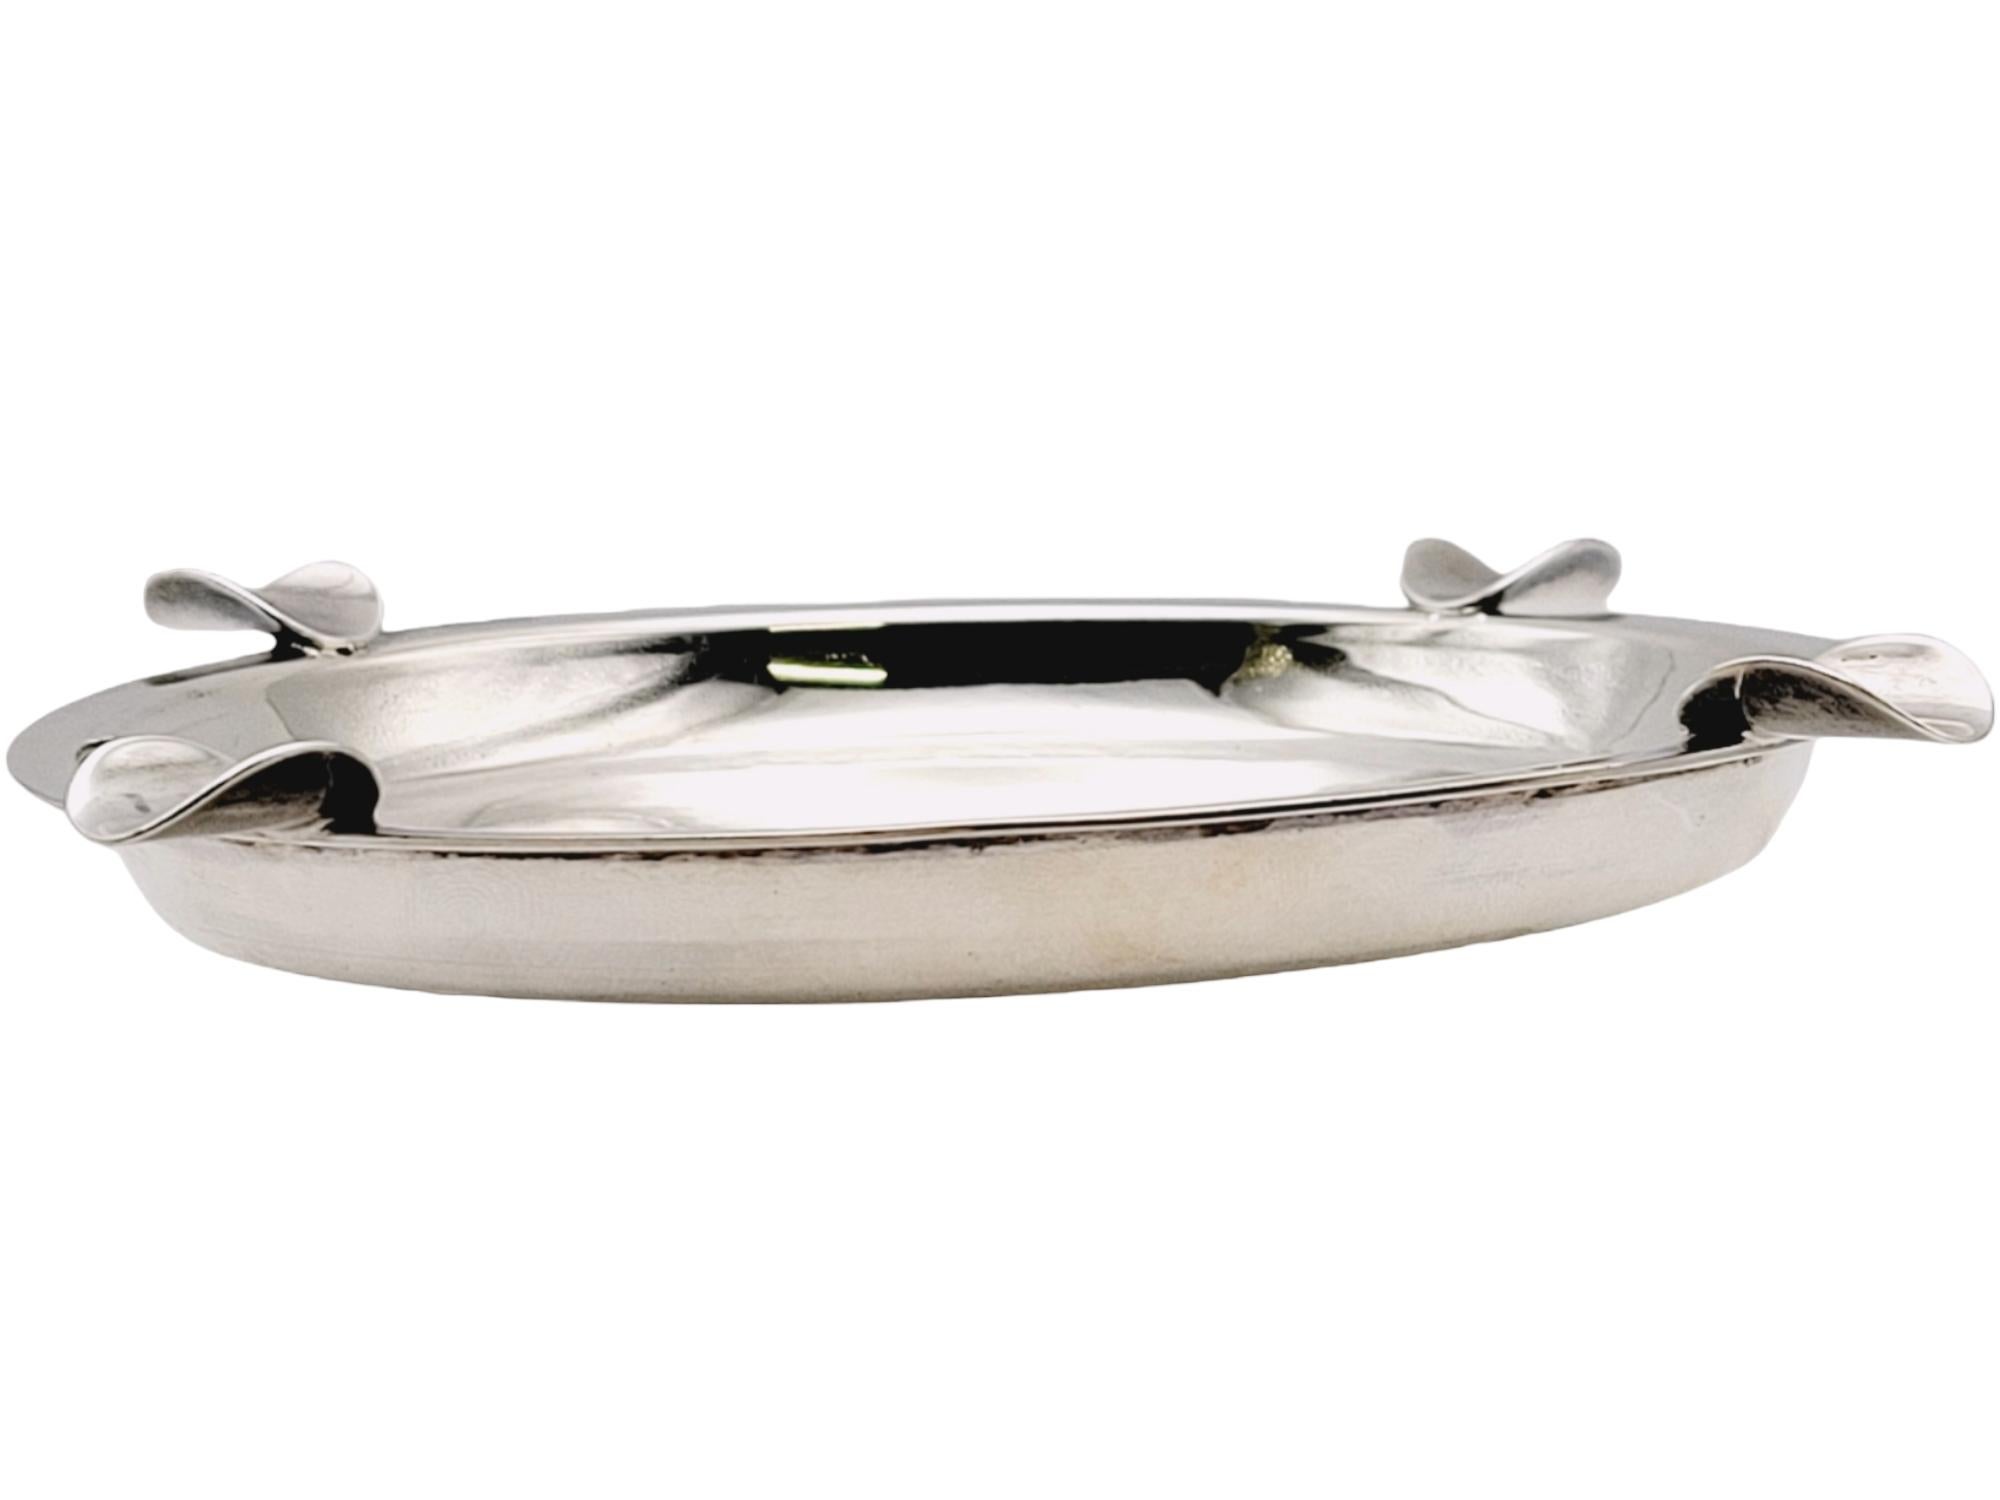 Carl Poul Petersen Polished Modern Ashtray in Sterling Silver, circa 1940-1970 For Sale 5